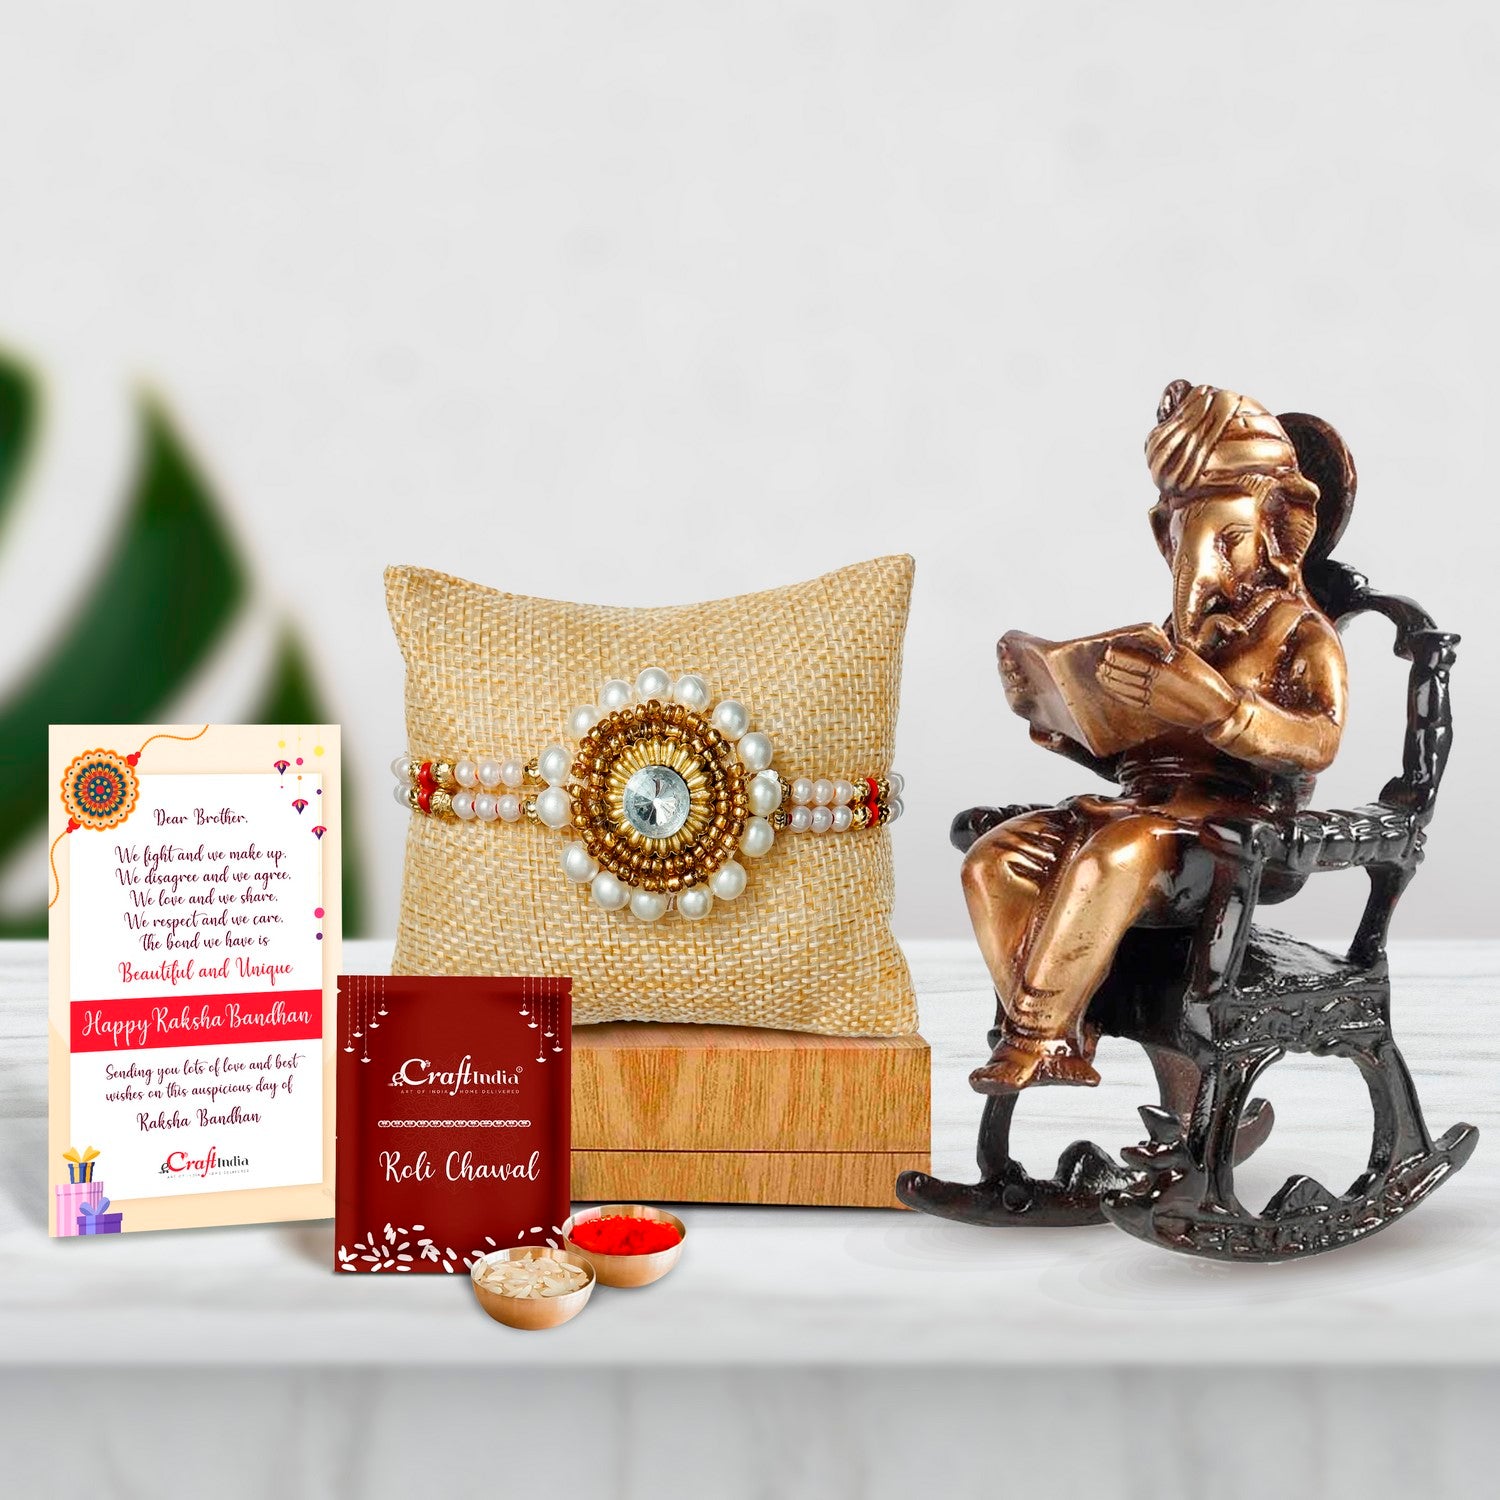 Designer Handcrafted Stone Pearl Rakhi with Brass Lord Ganesha on Rocking Chair Antique Showpiece and Roli Chawal Pack, Best Wishes Greeting Card